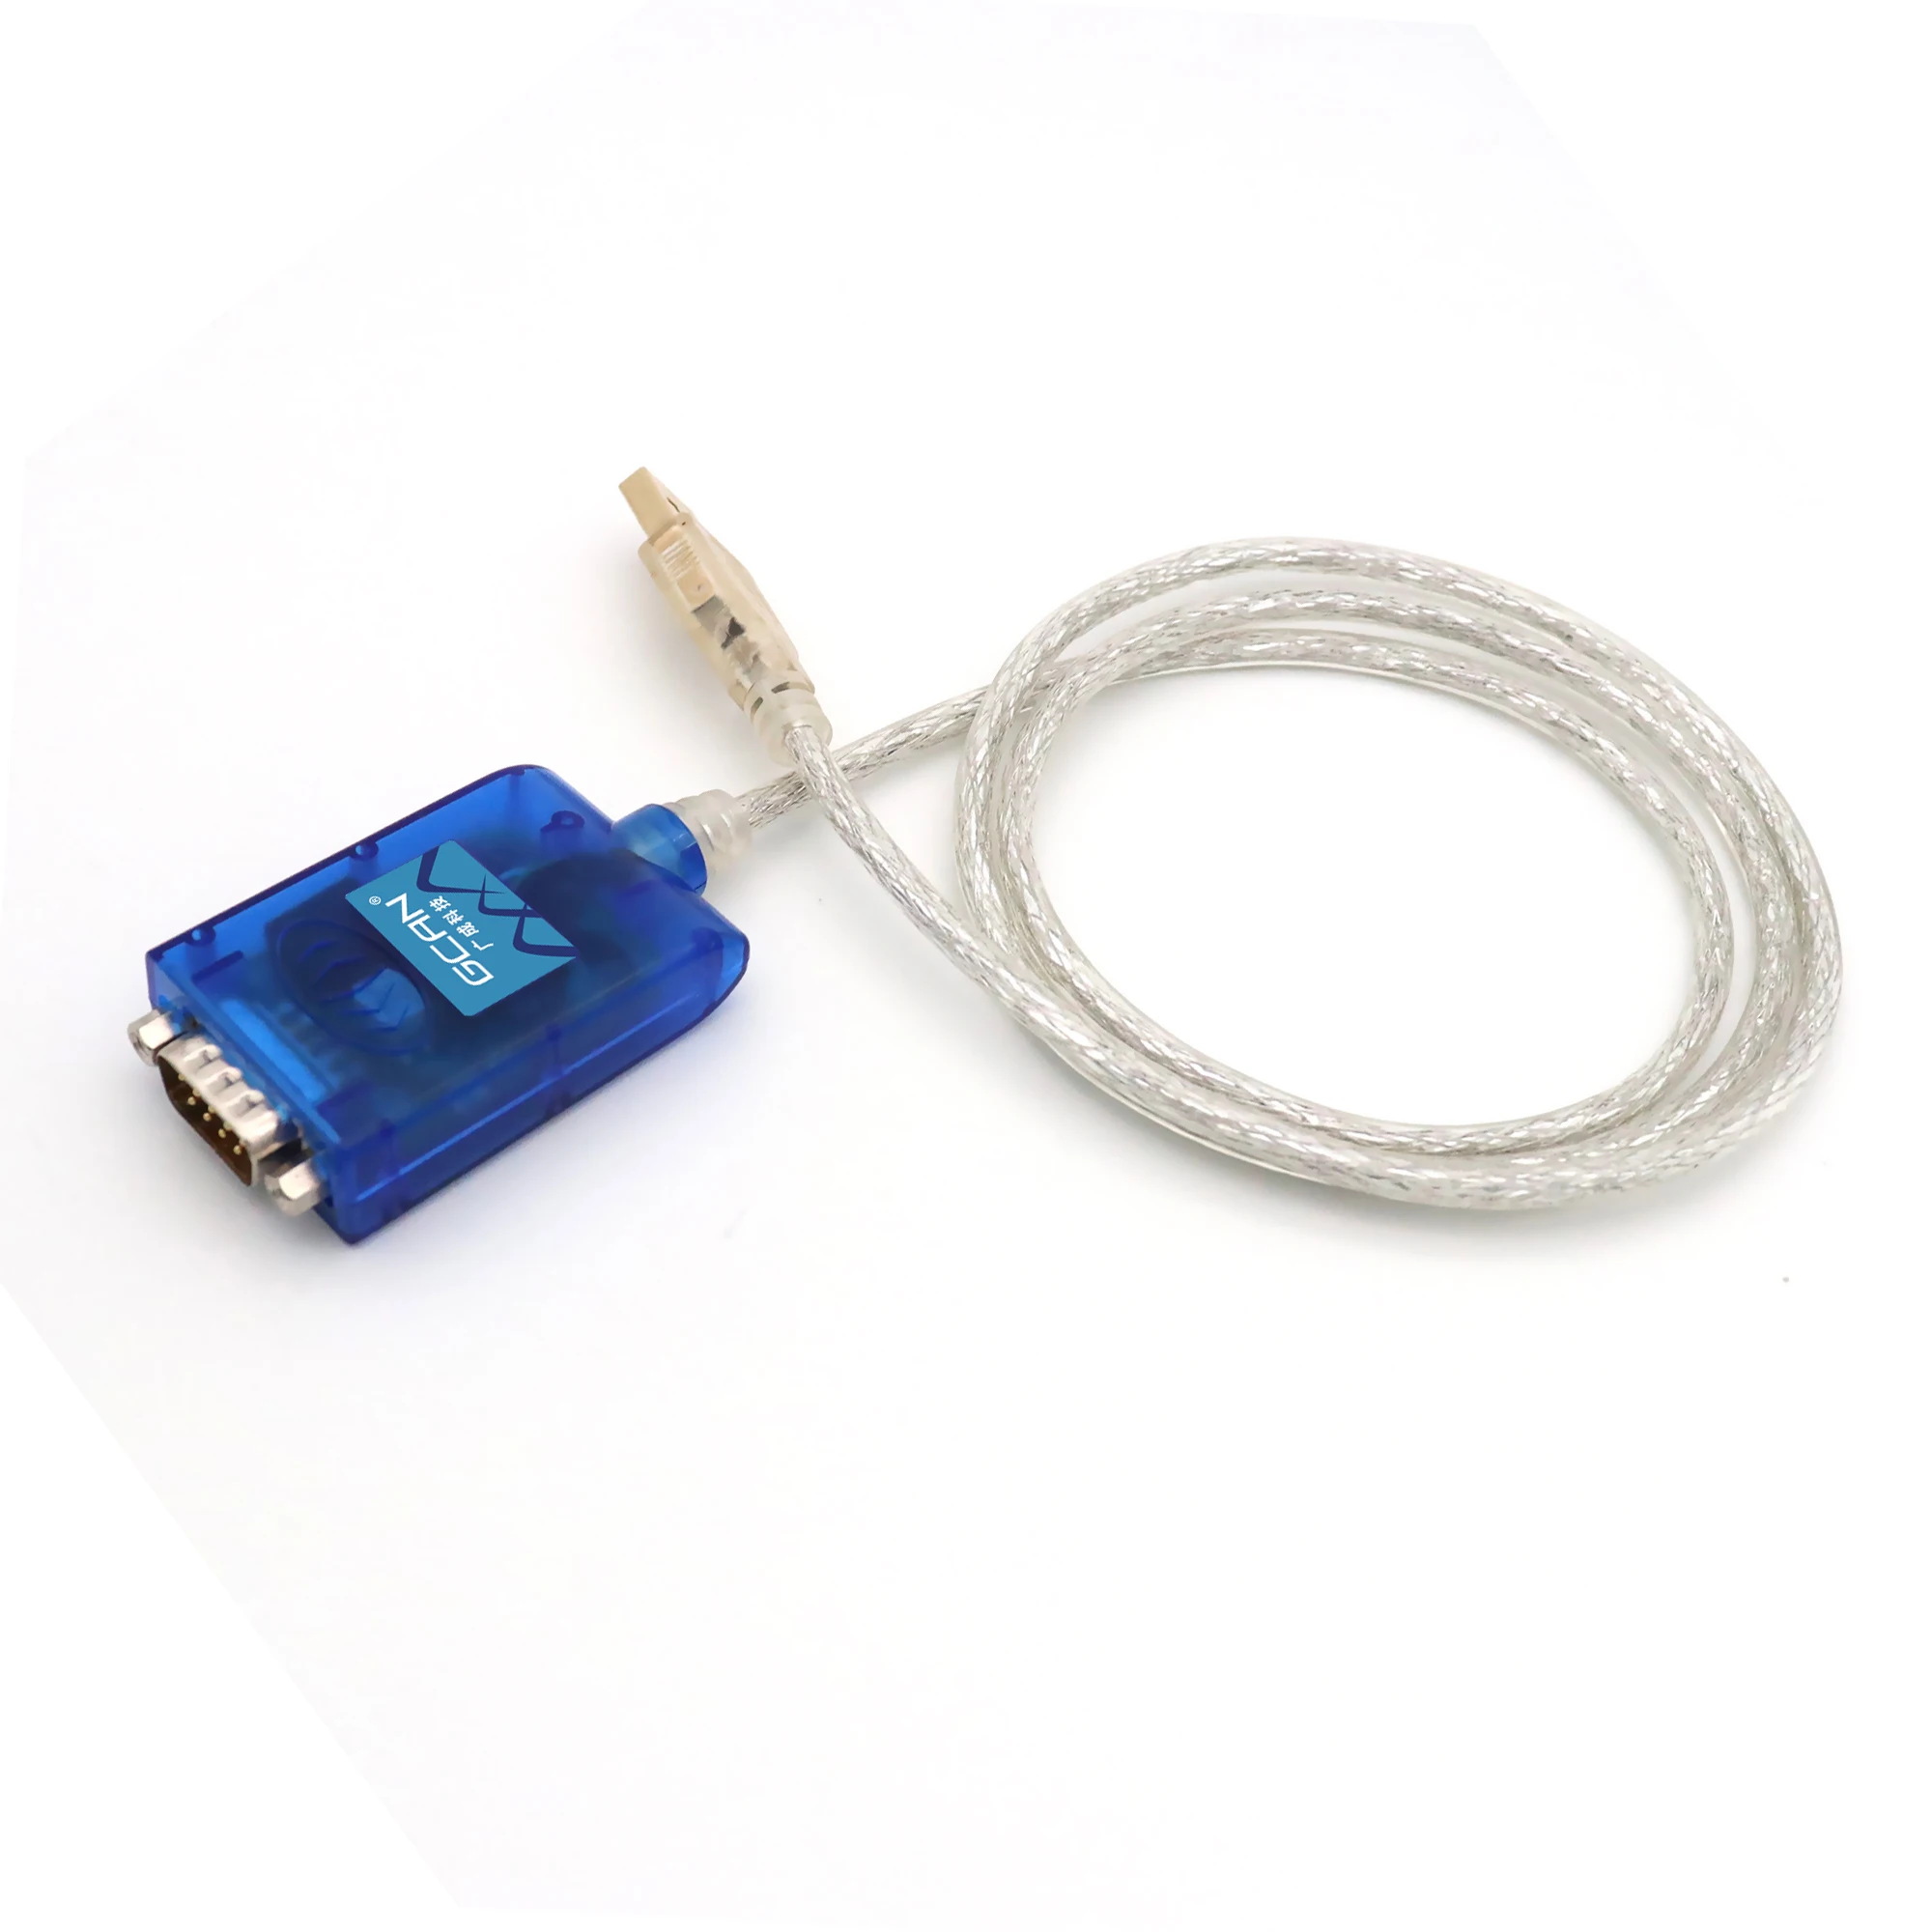 GCAN Mini USBCAN Adapter Analyzer with Small and Portable CAN Bus Interface Communication Canbus Module Debug Tools